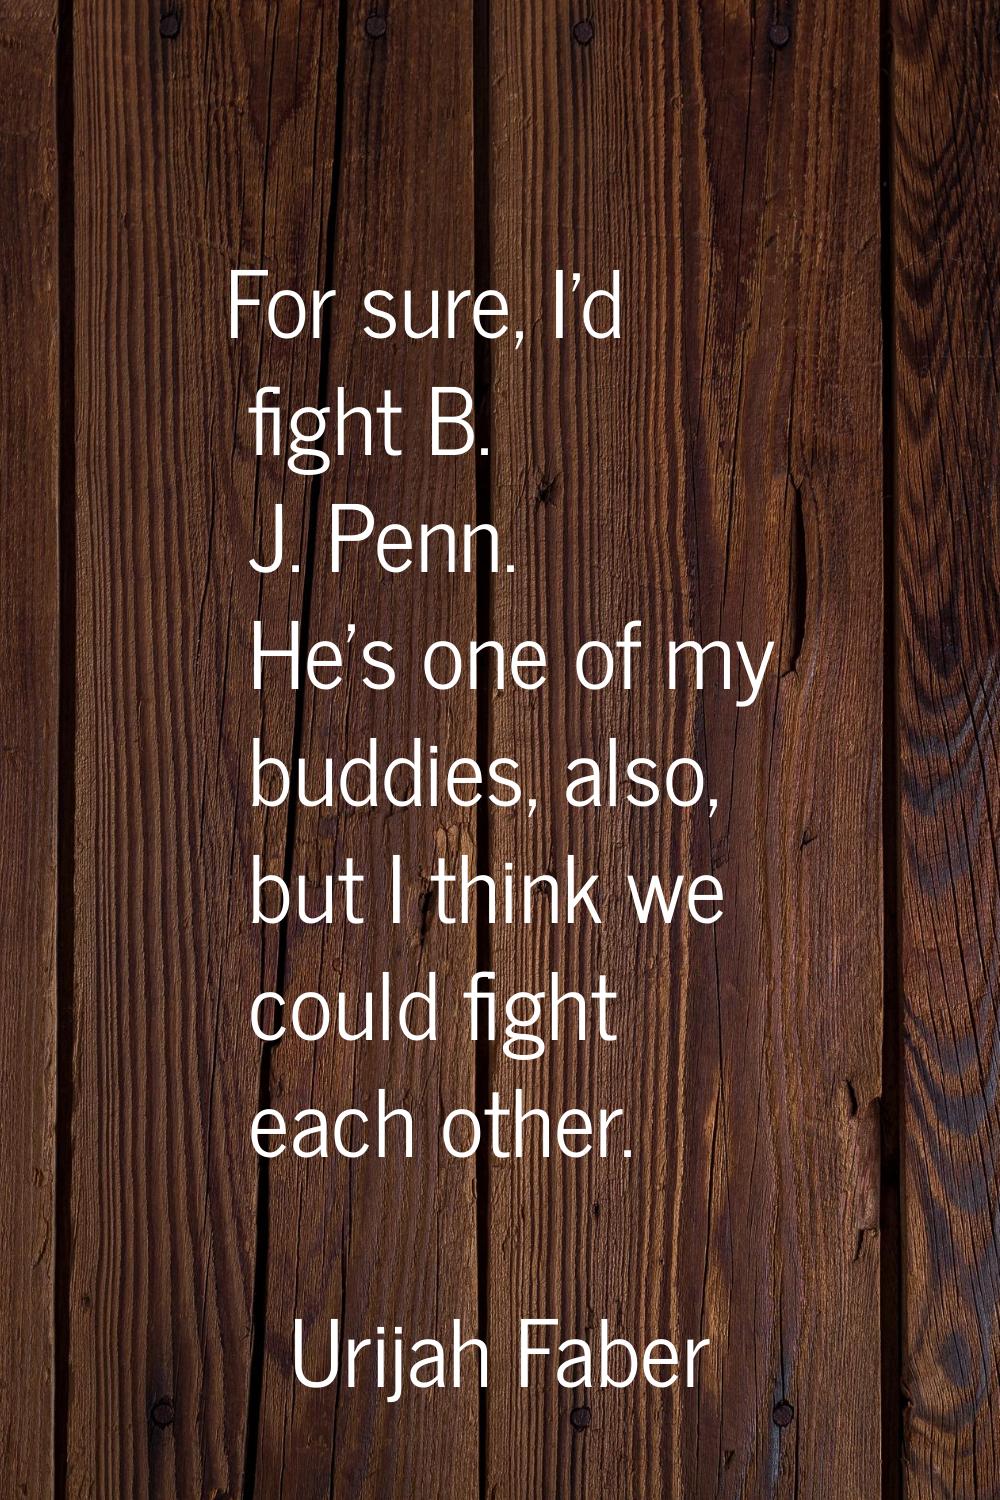 For sure, I'd fight B. J. Penn. He's one of my buddies, also, but I think we could fight each other